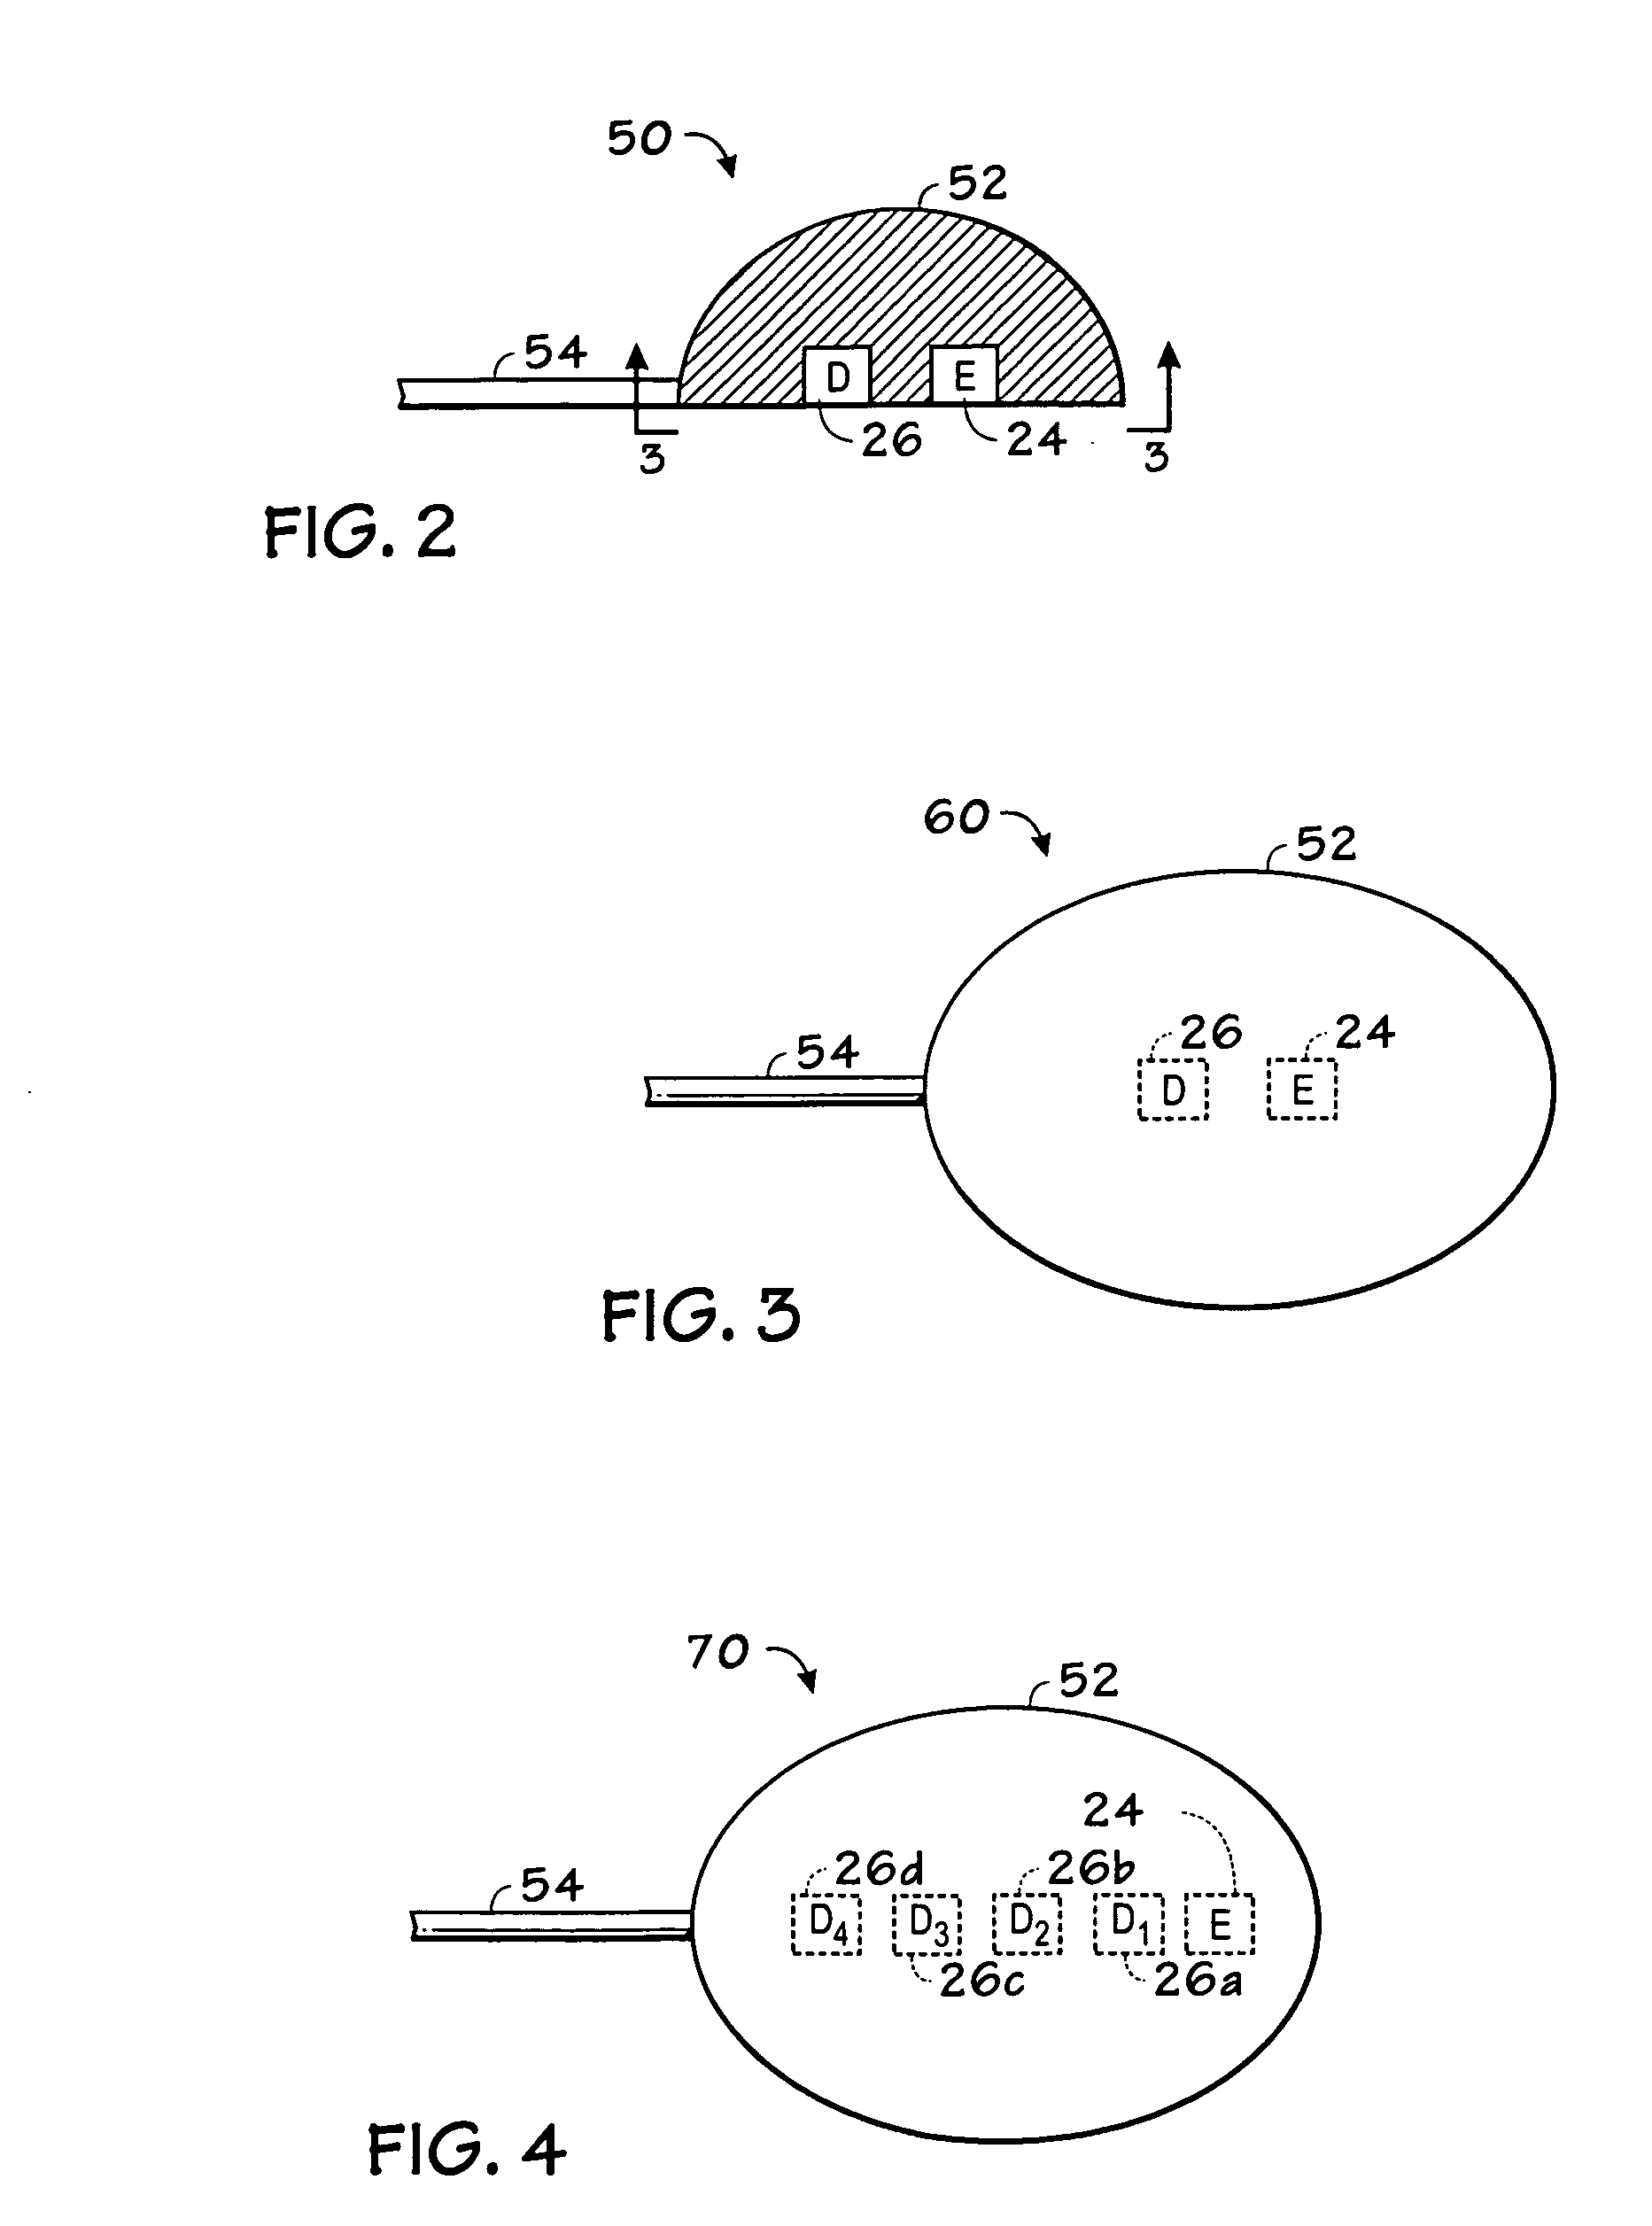 System and method for detection of skin wounds and compartment syndromes